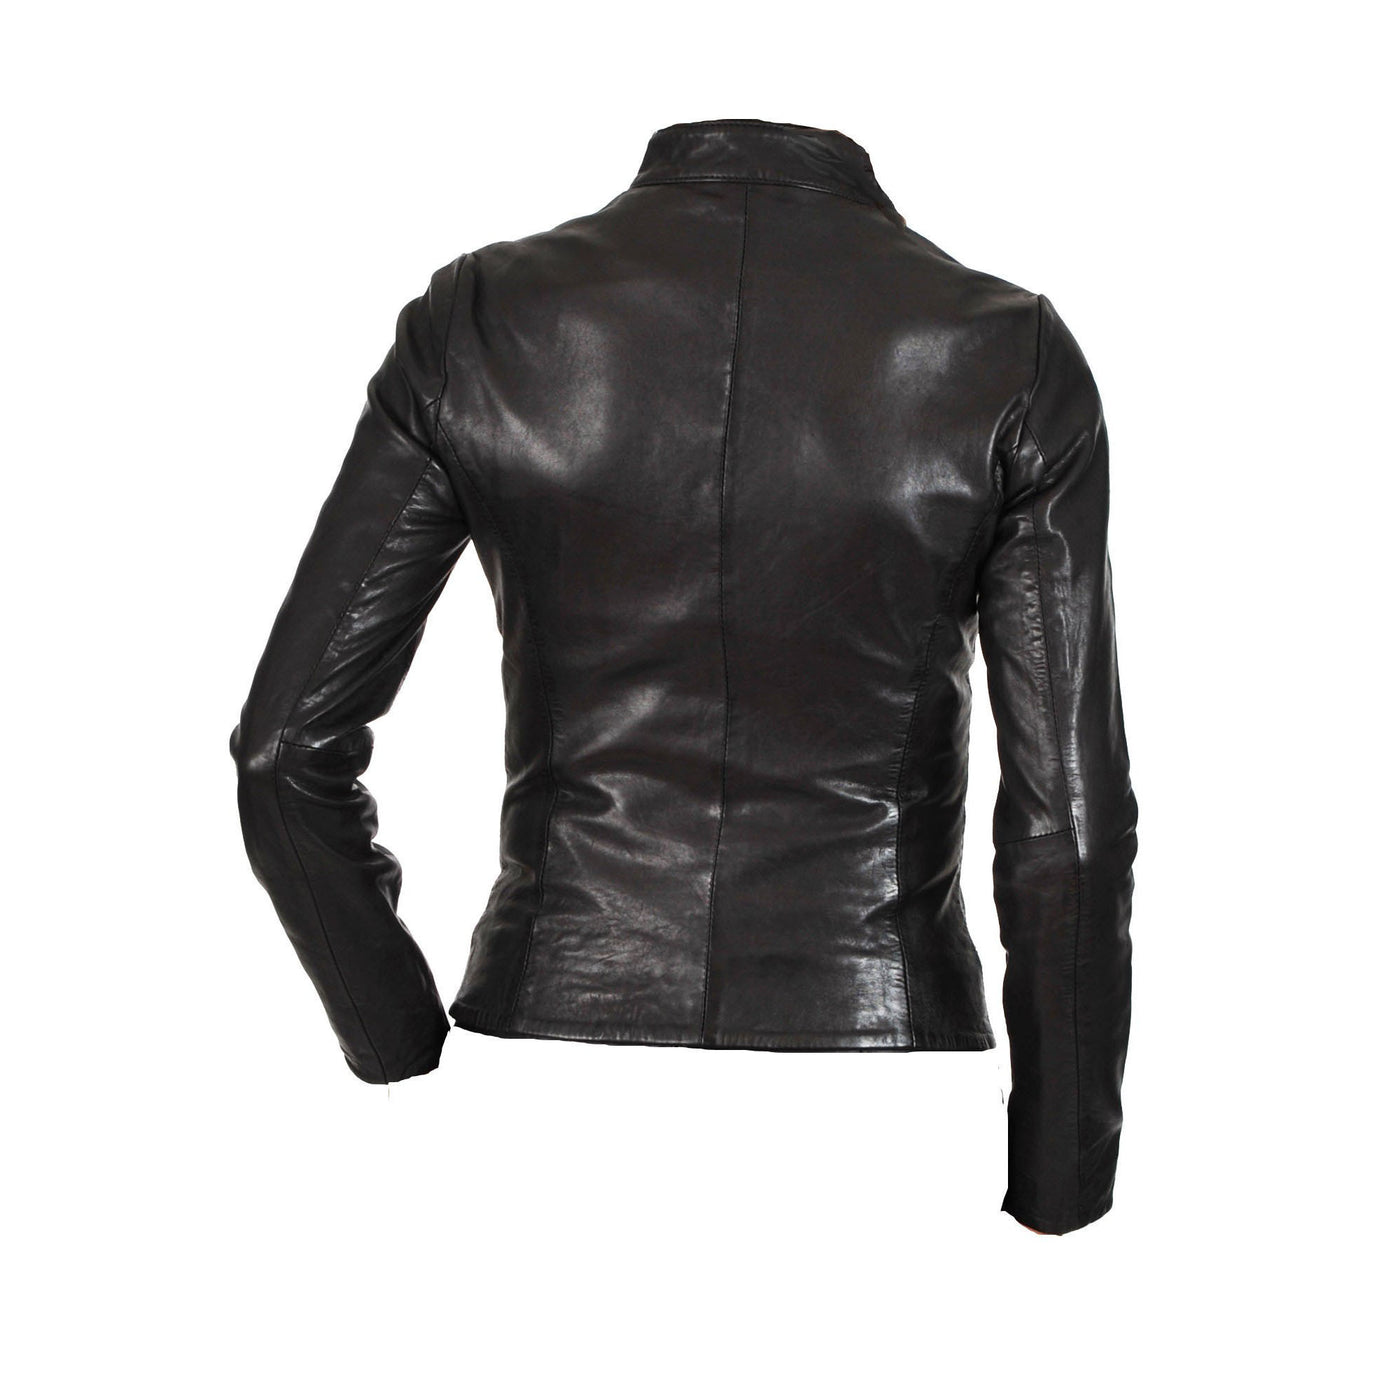 Women's slim fit leather jacket - Lusso Leather - 2